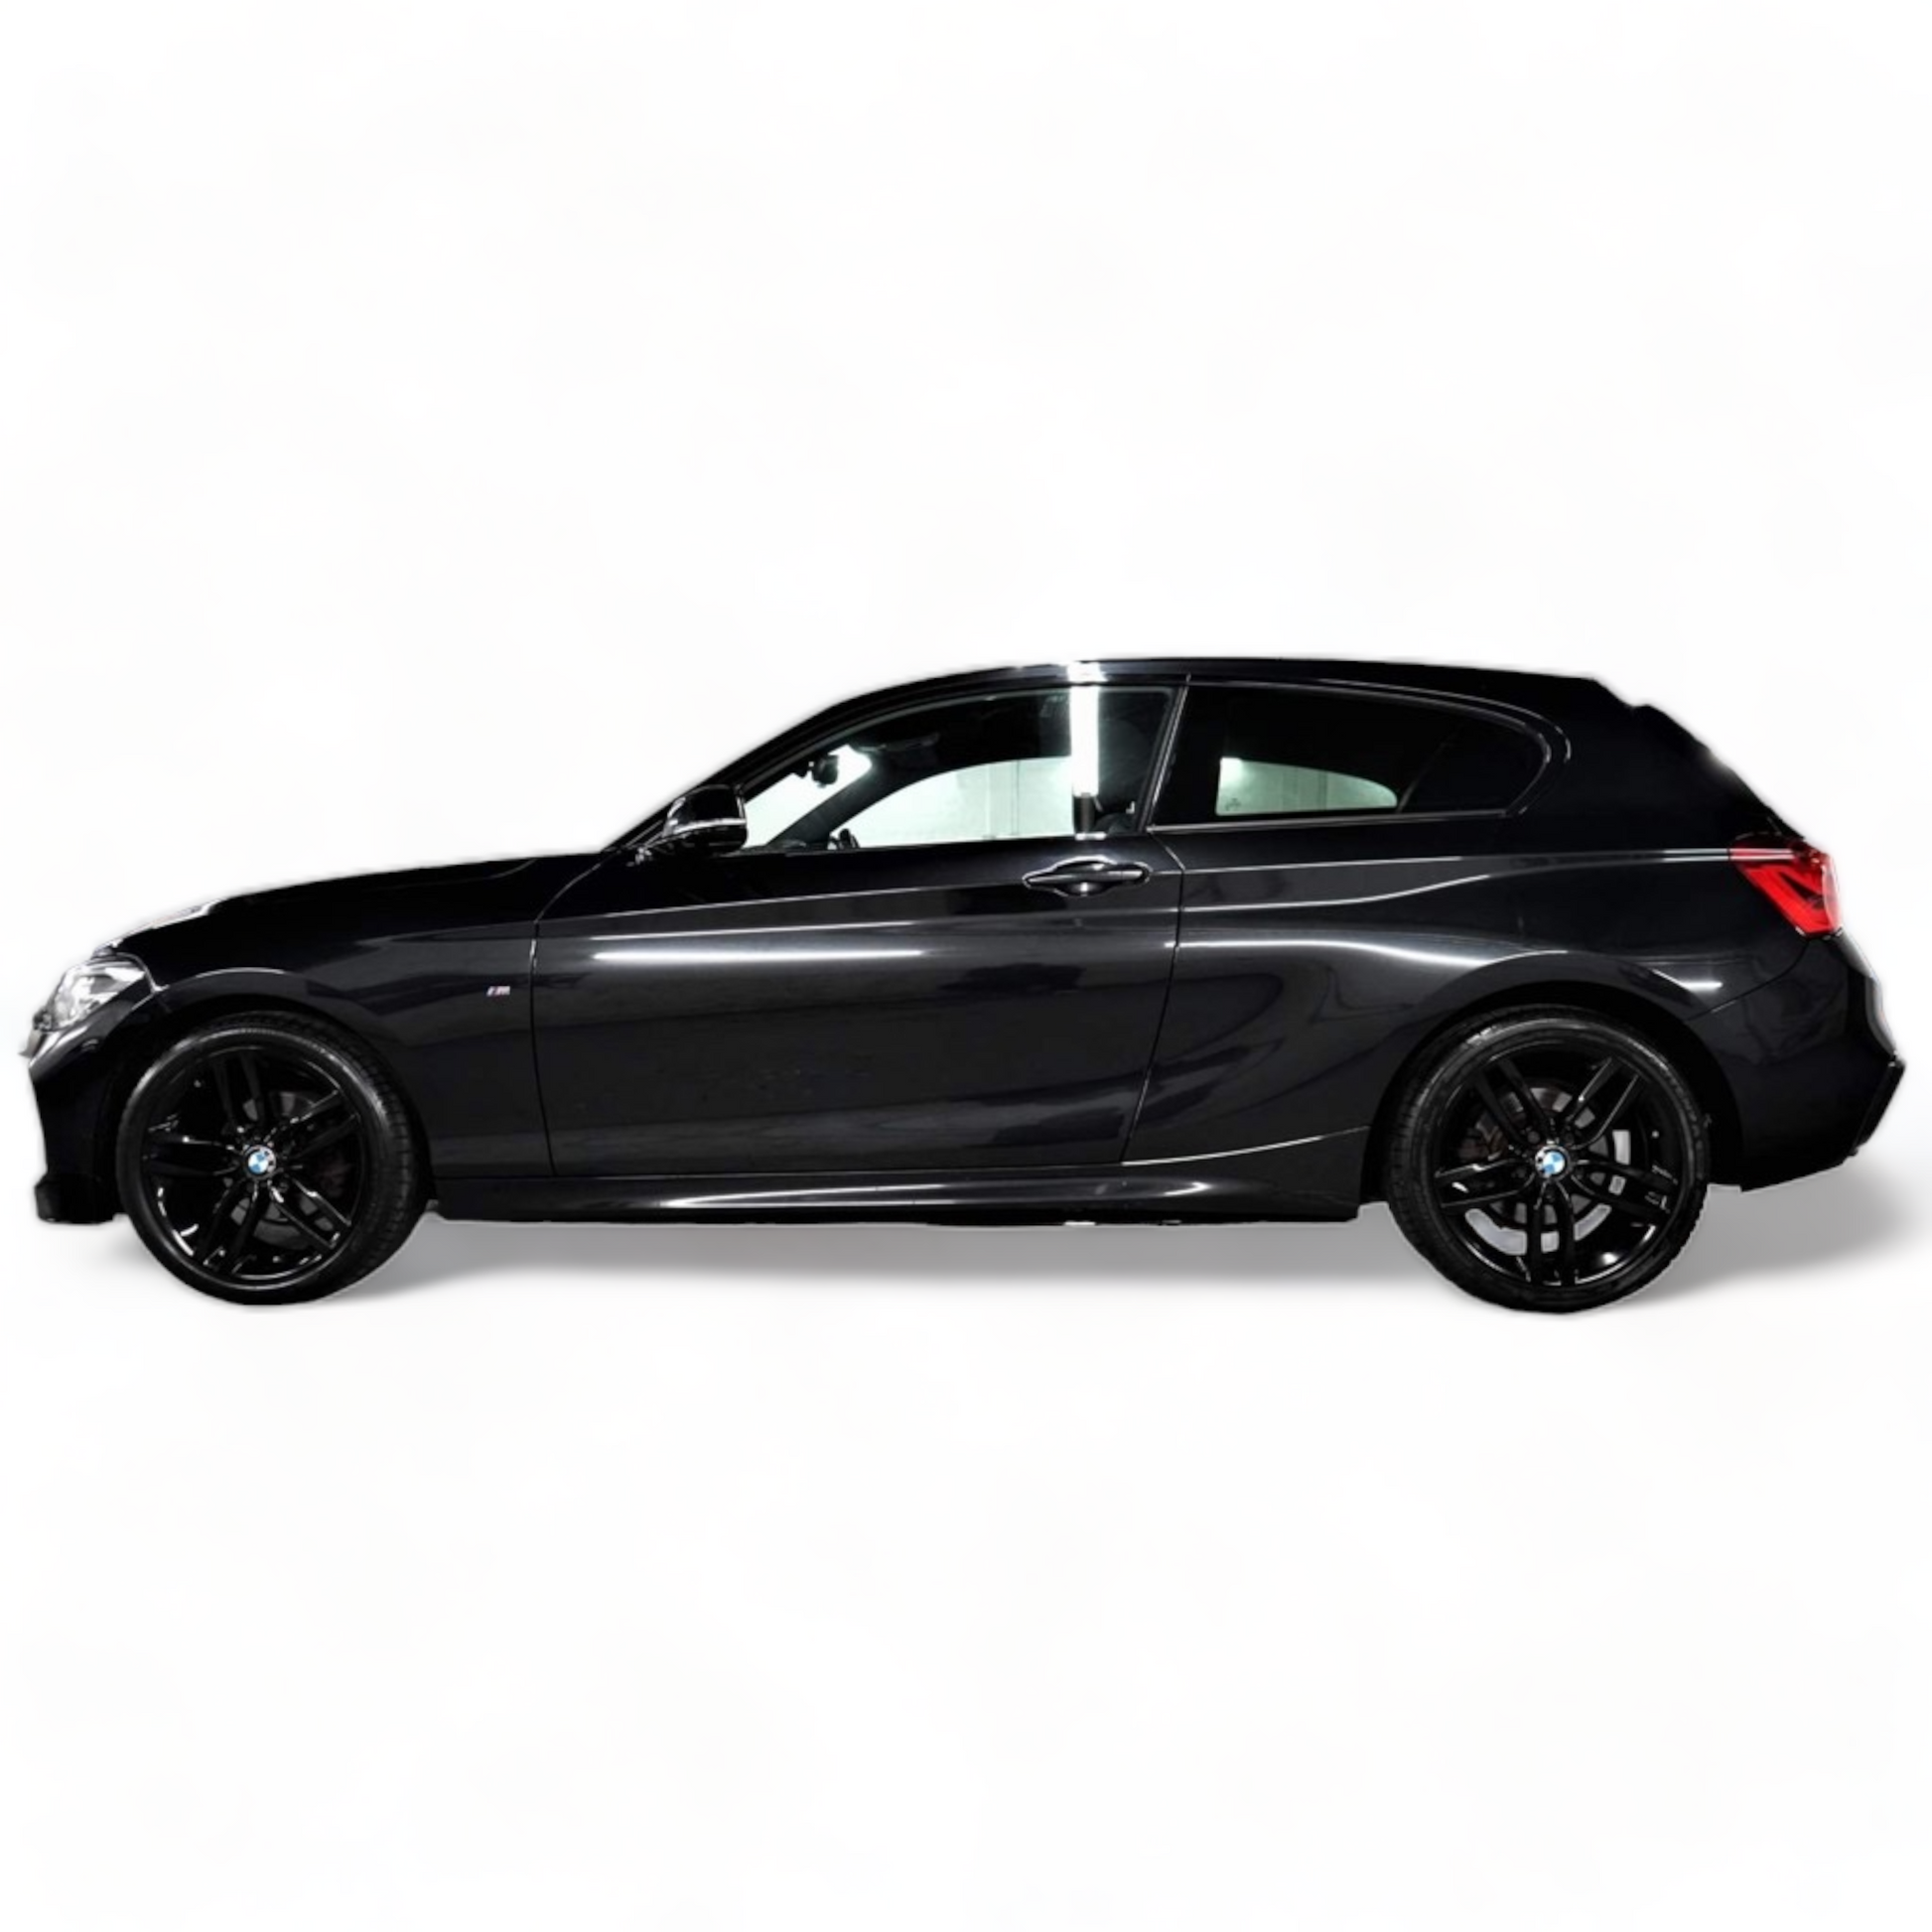 BMW F20 Lci 1 Series hatchback Full body kit Performance Style Package